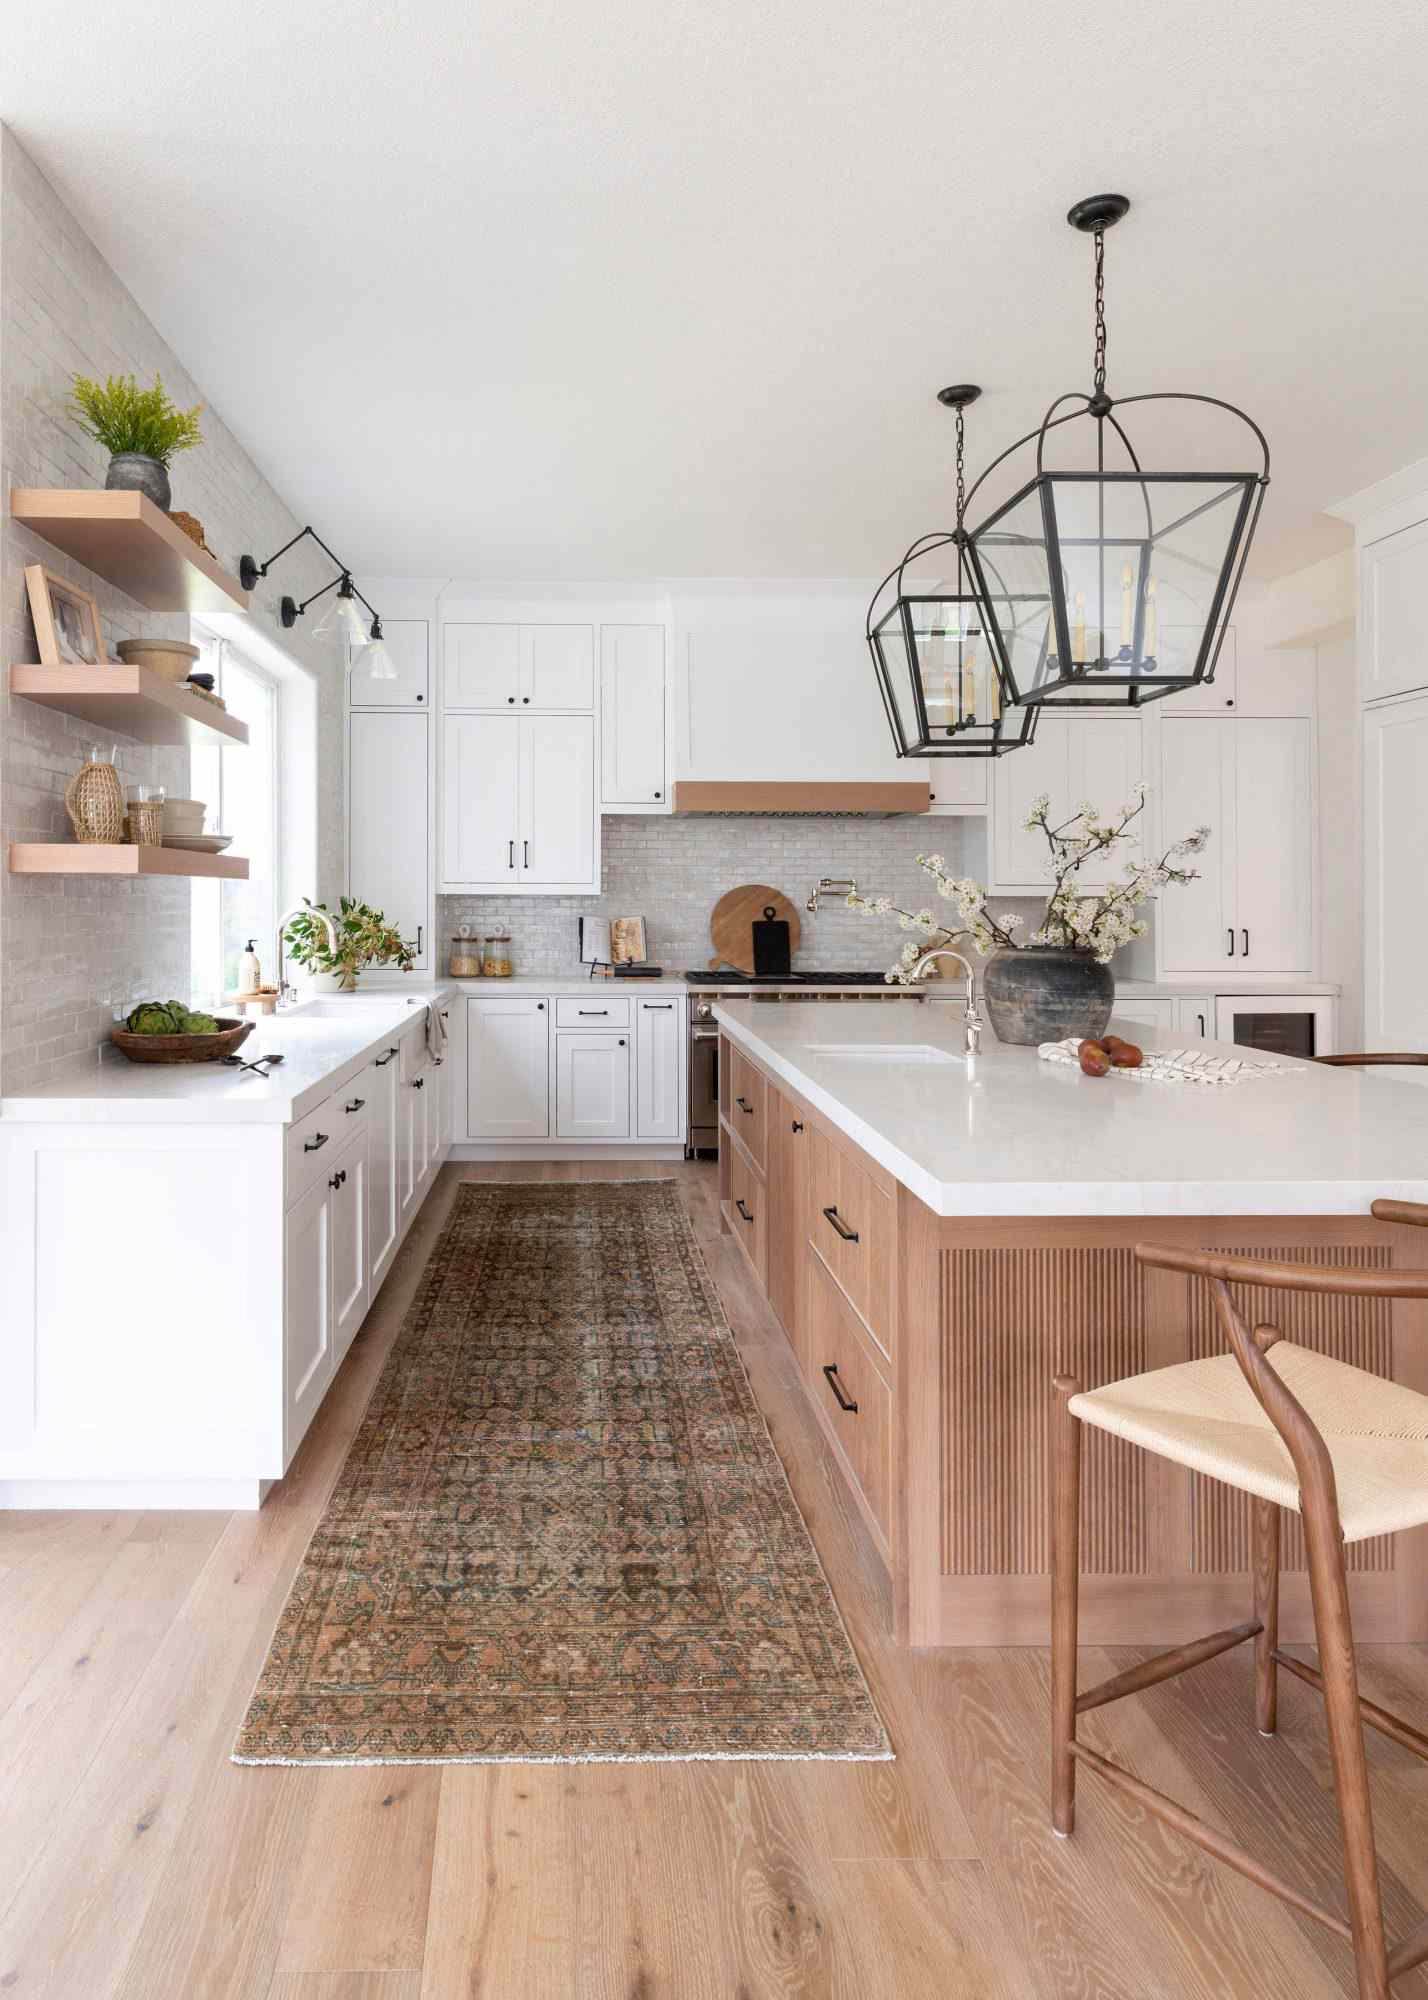 Kitchen with white cabinets and warm wood tones